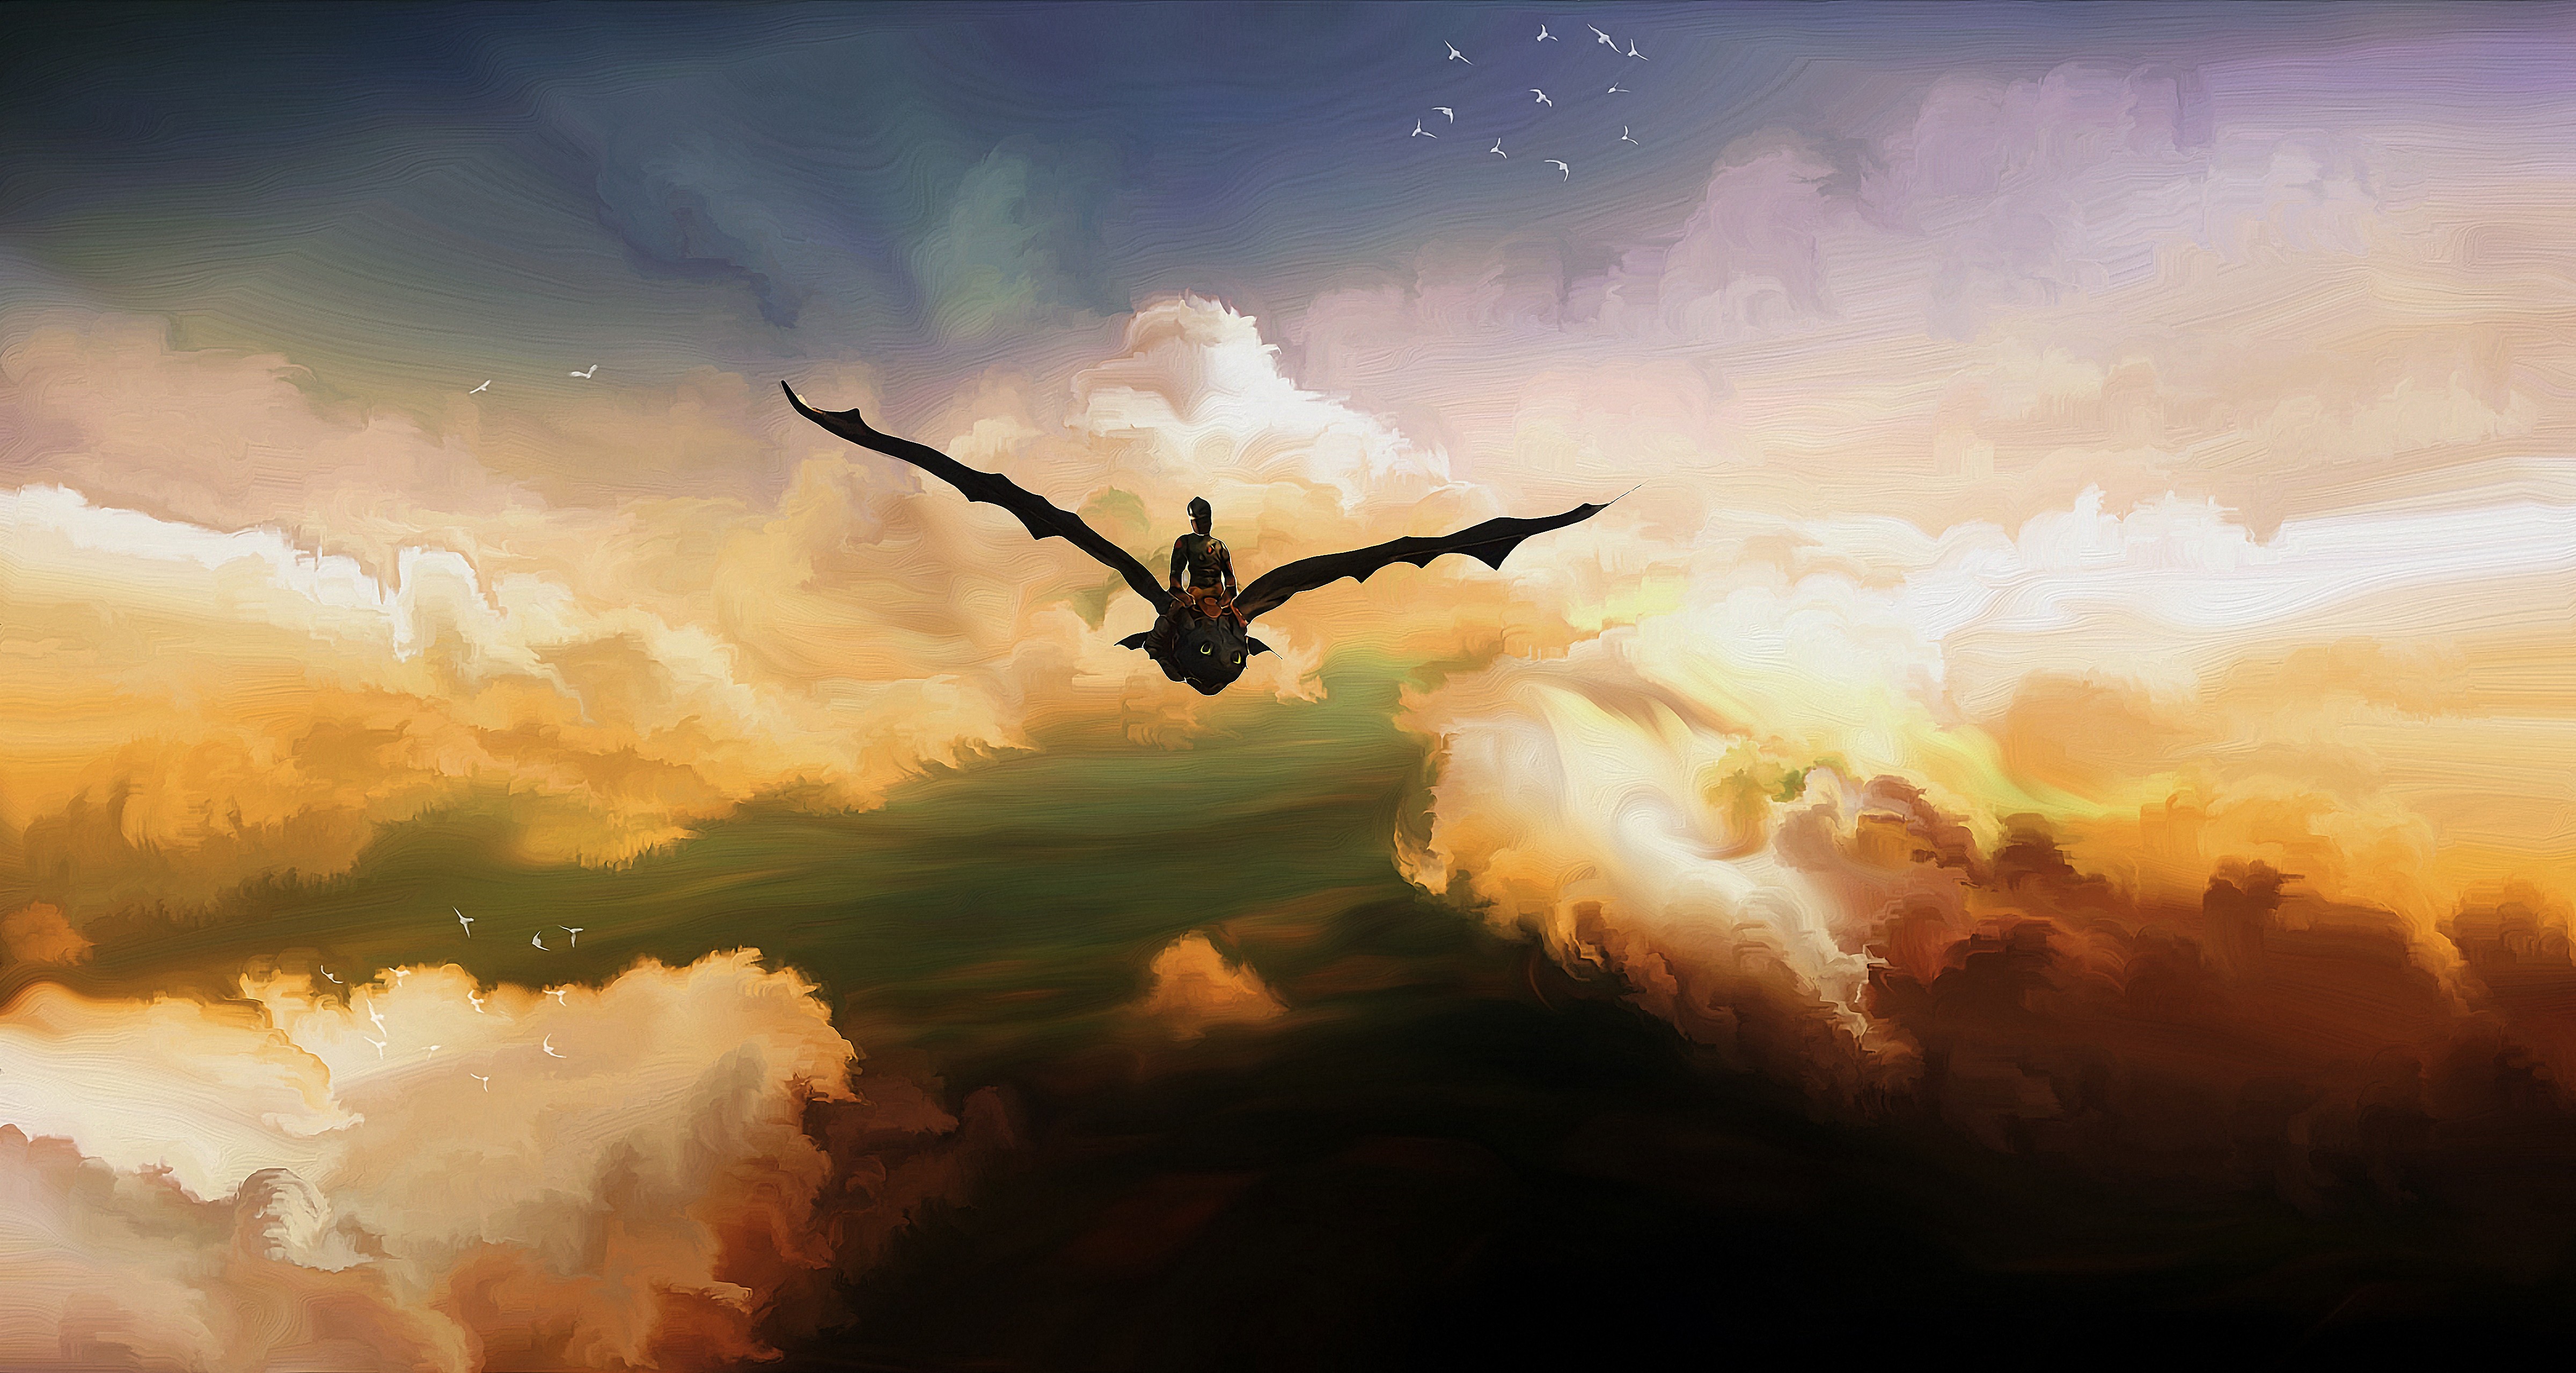 General 4800x2558 How to Train Your Dragon 2 animated movies movies dragon creature sky sunlight clouds fantasy art